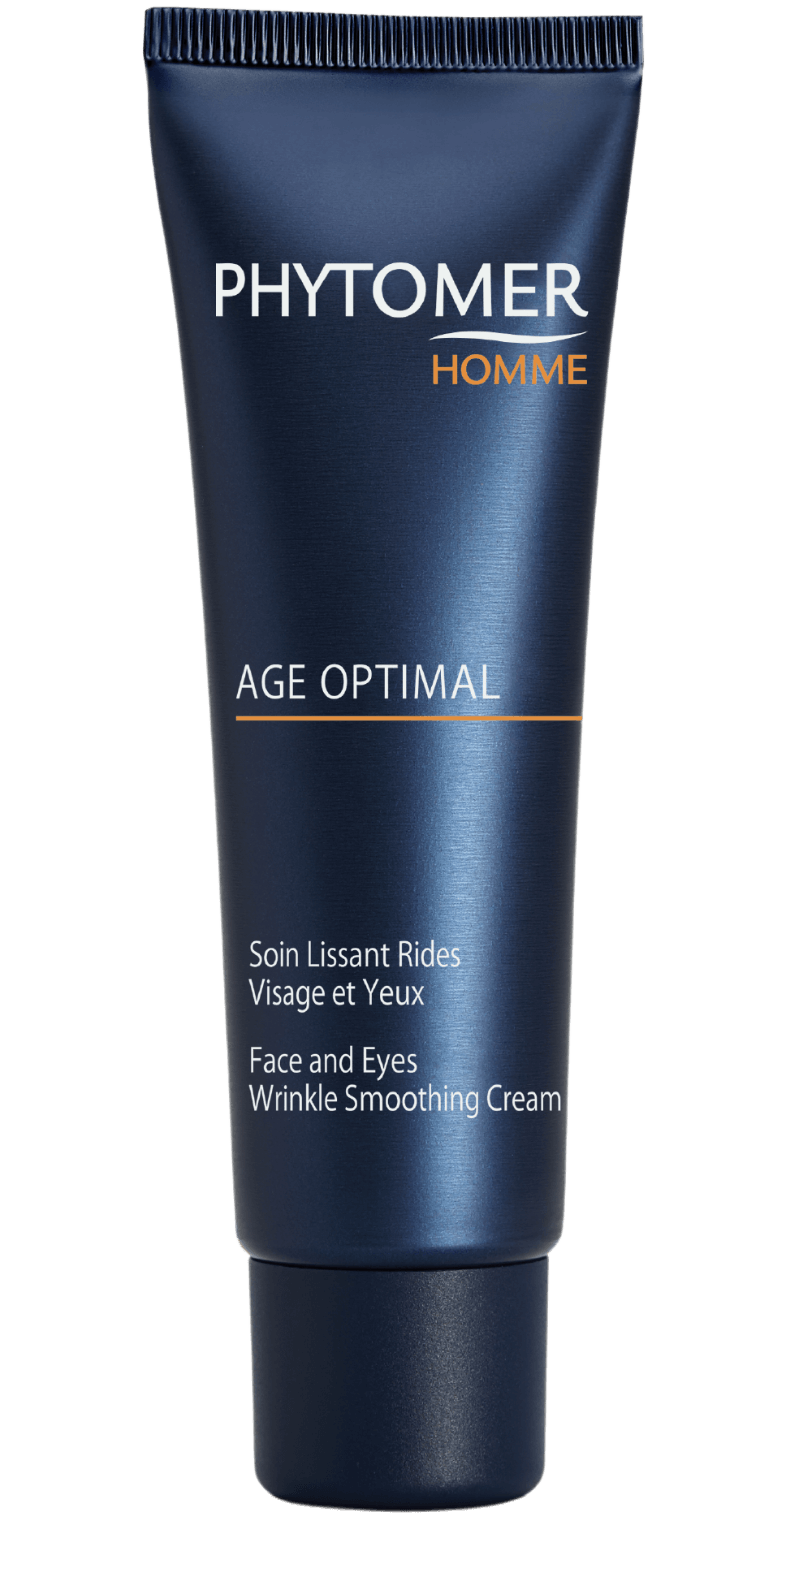 's Phytomer AGE OPTIMALFace and Eyes Wrinkle Smoothing Cream - Bellini's Skin and Parfumerie 